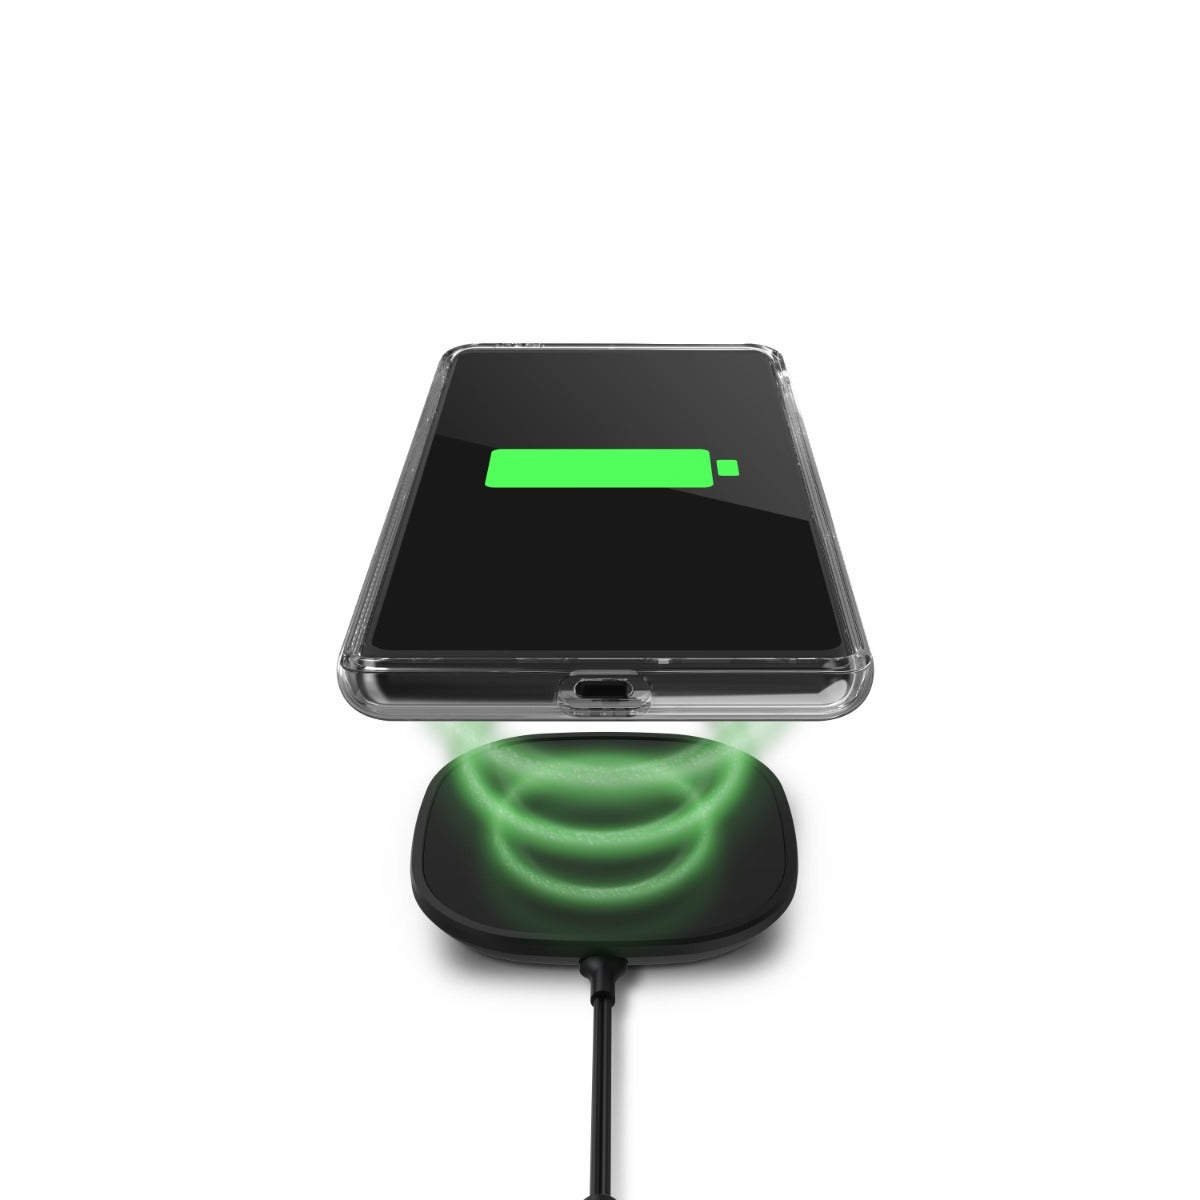 Wireless Charging Compatible ||Denali is compatible with most wireless chargers.